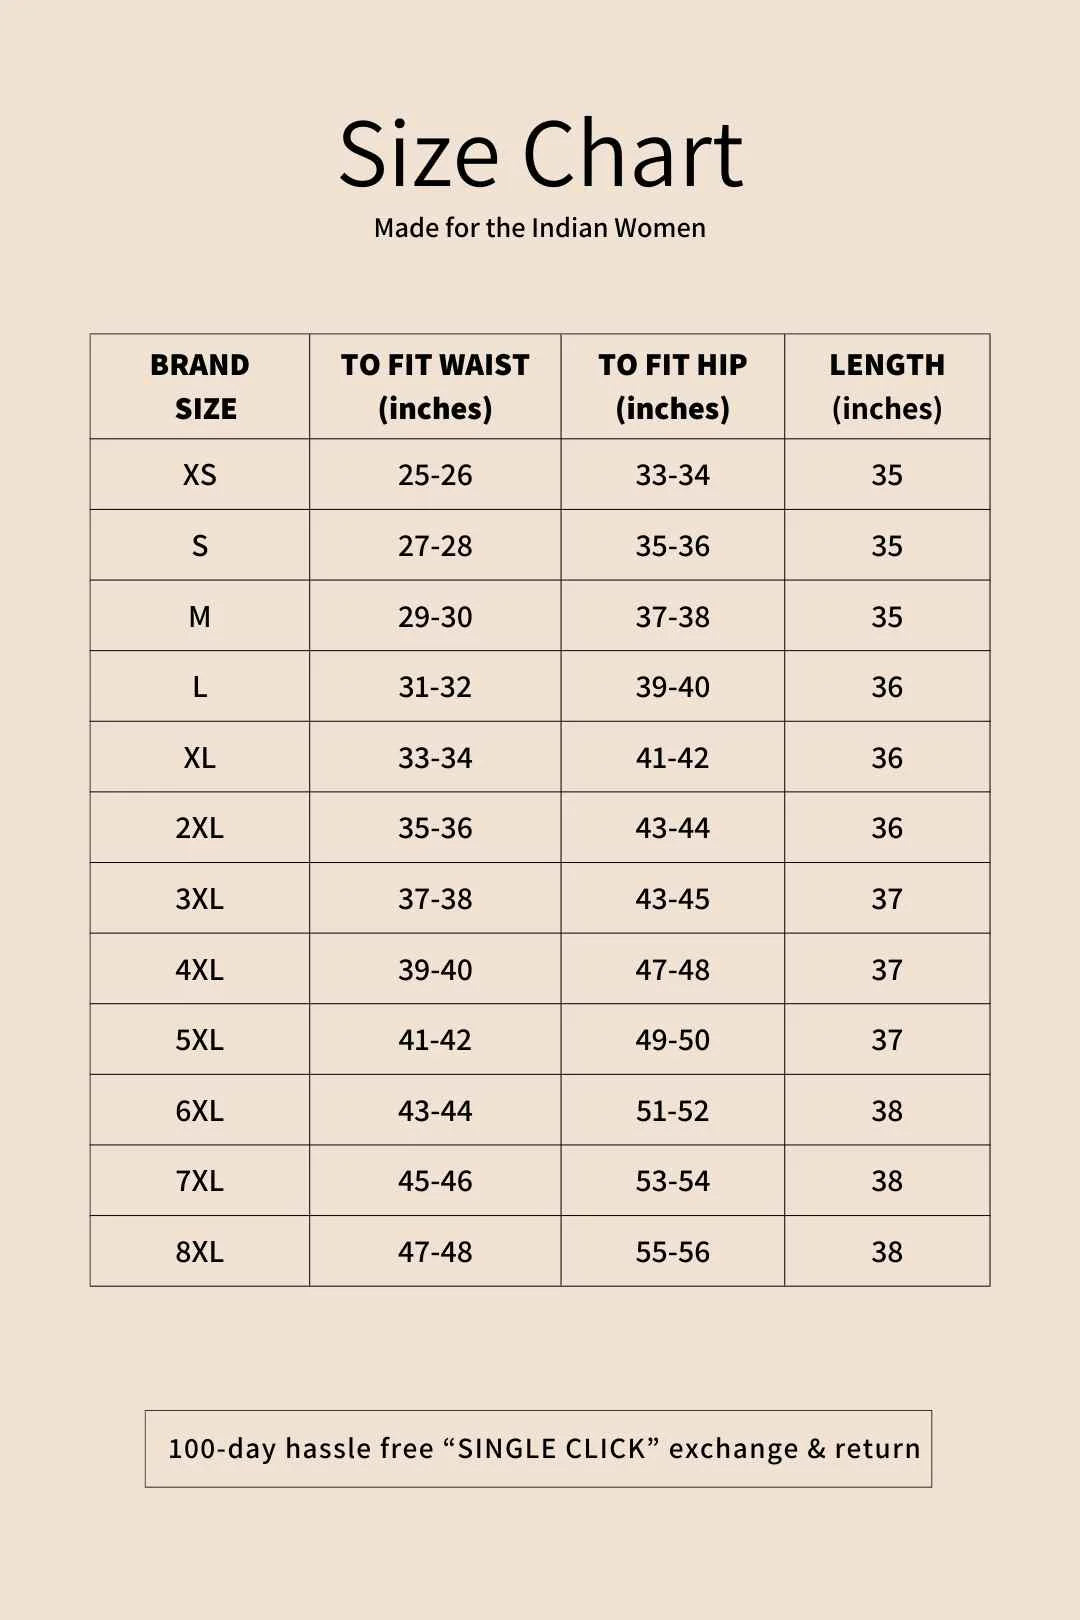 pant sizes chart for women - Google Search  Sewing measurements,  Measurement chart, Body measurement chart